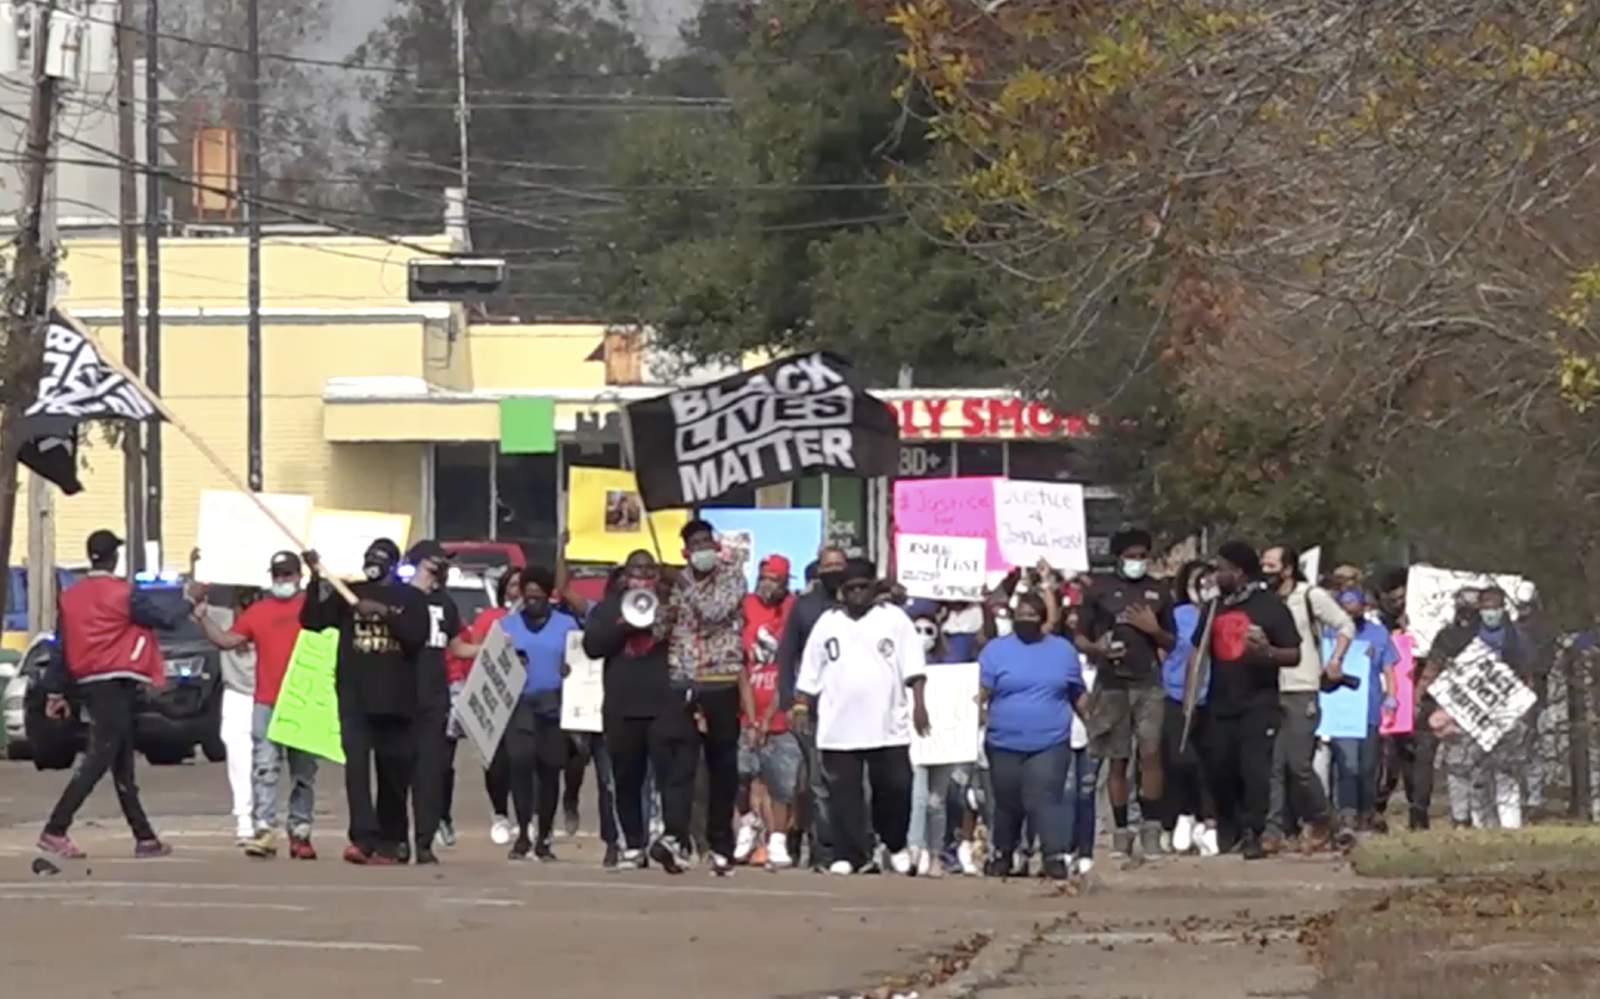 March planned to protest fatal officer-involved shooting of Joshua Feast in La Marque